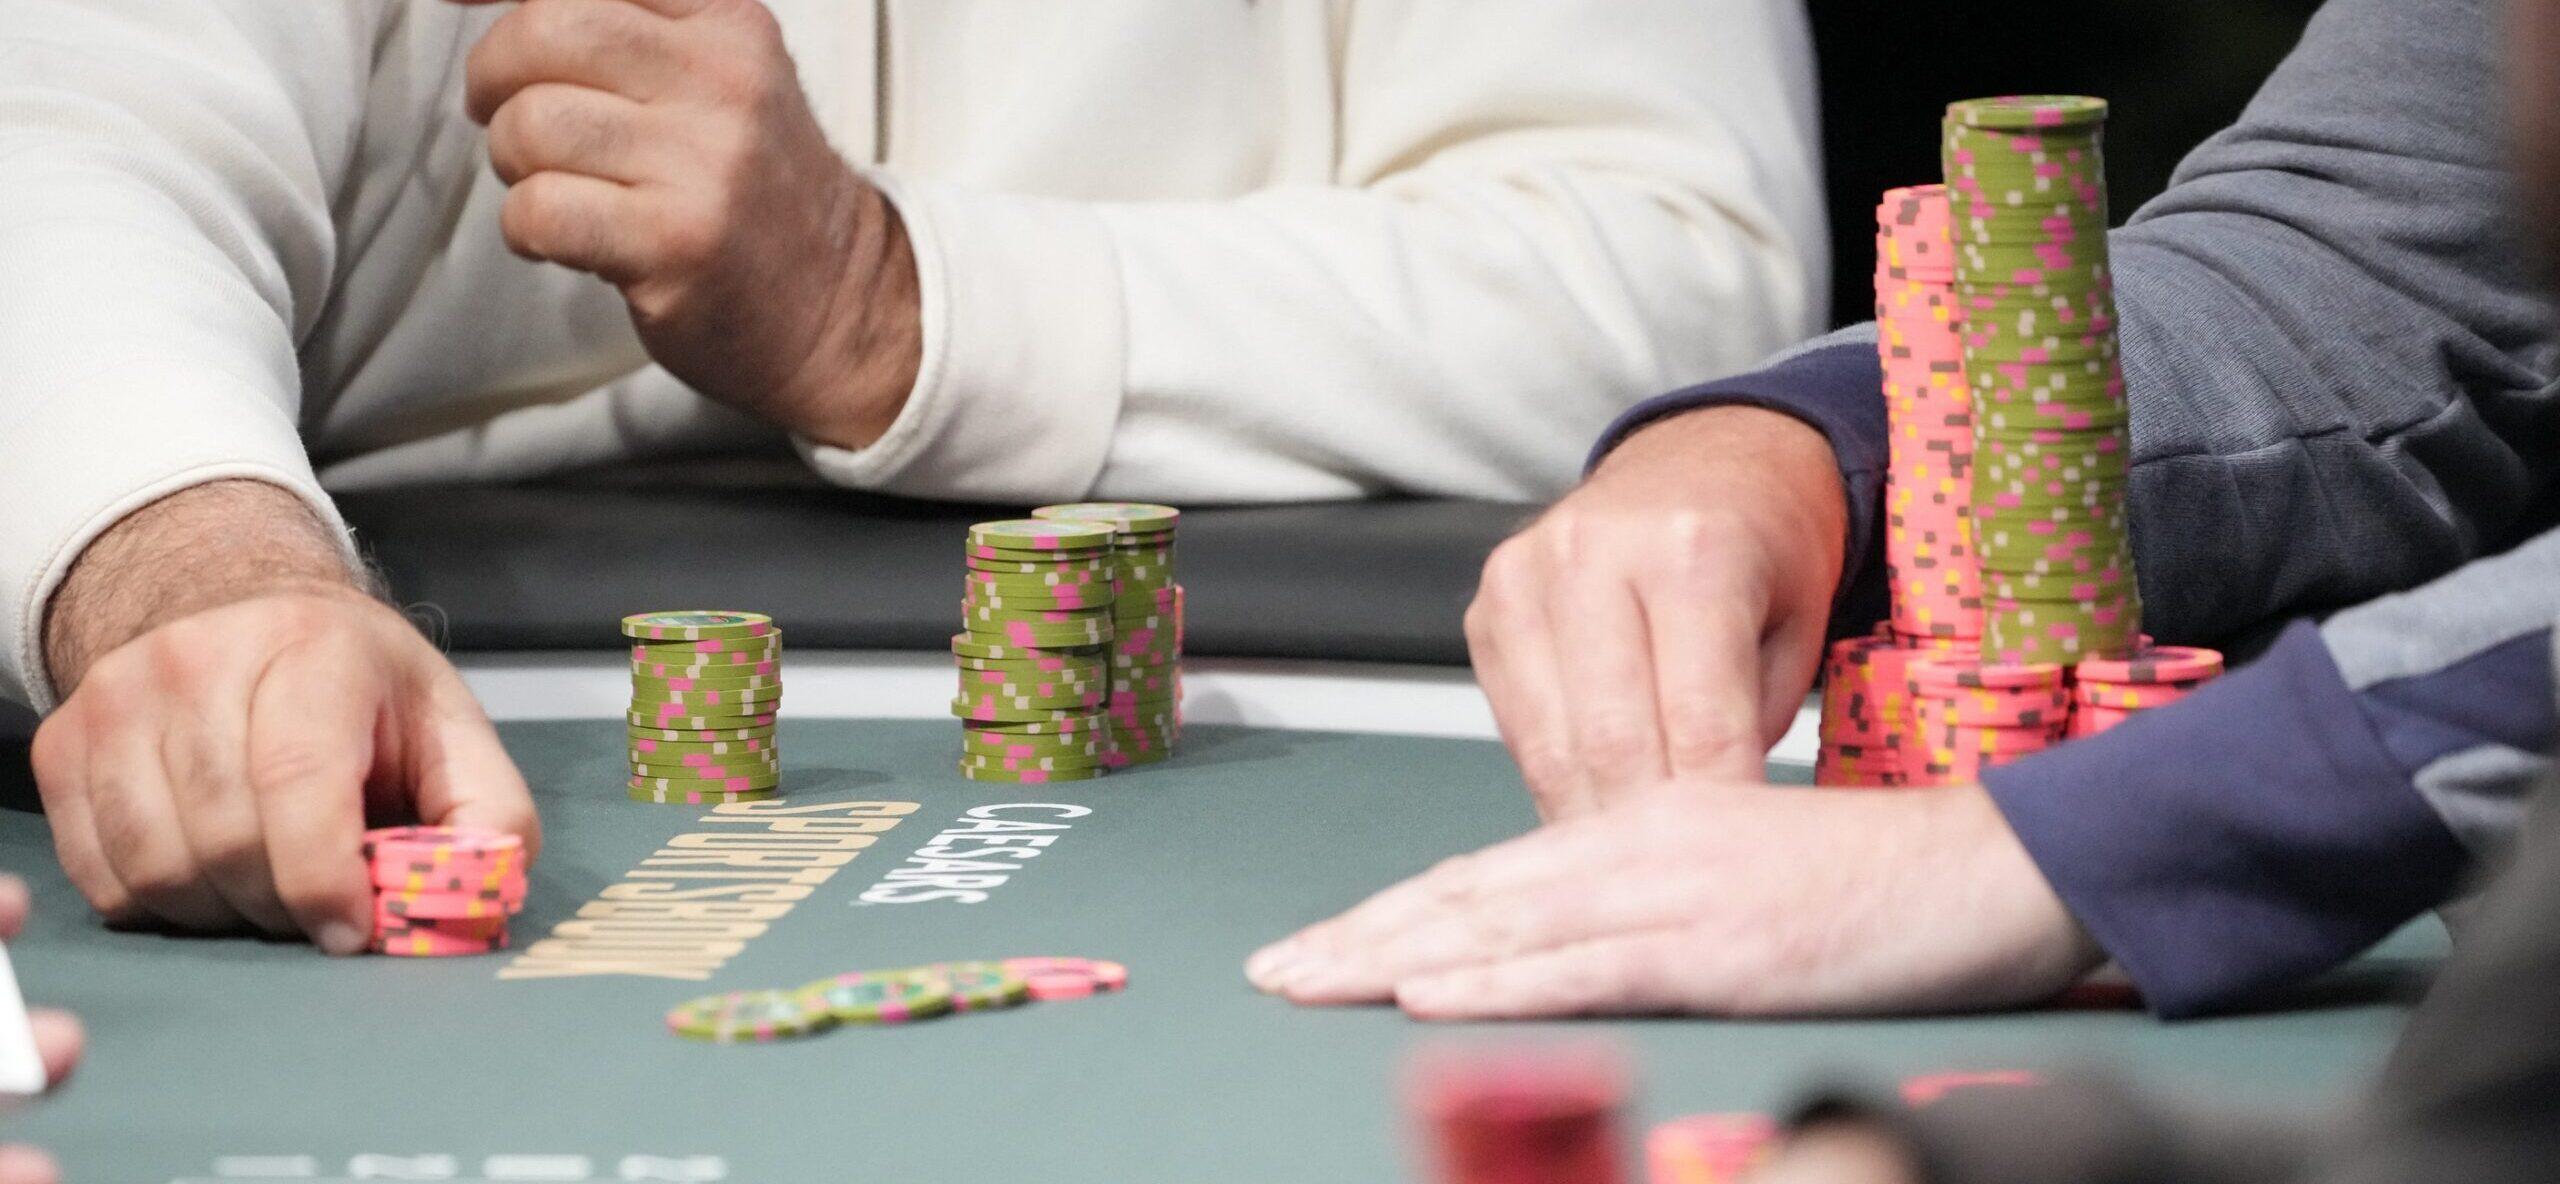 Fans Bash ‘Disgusting’ Poker Player For Lying About Cancer Diagnosis